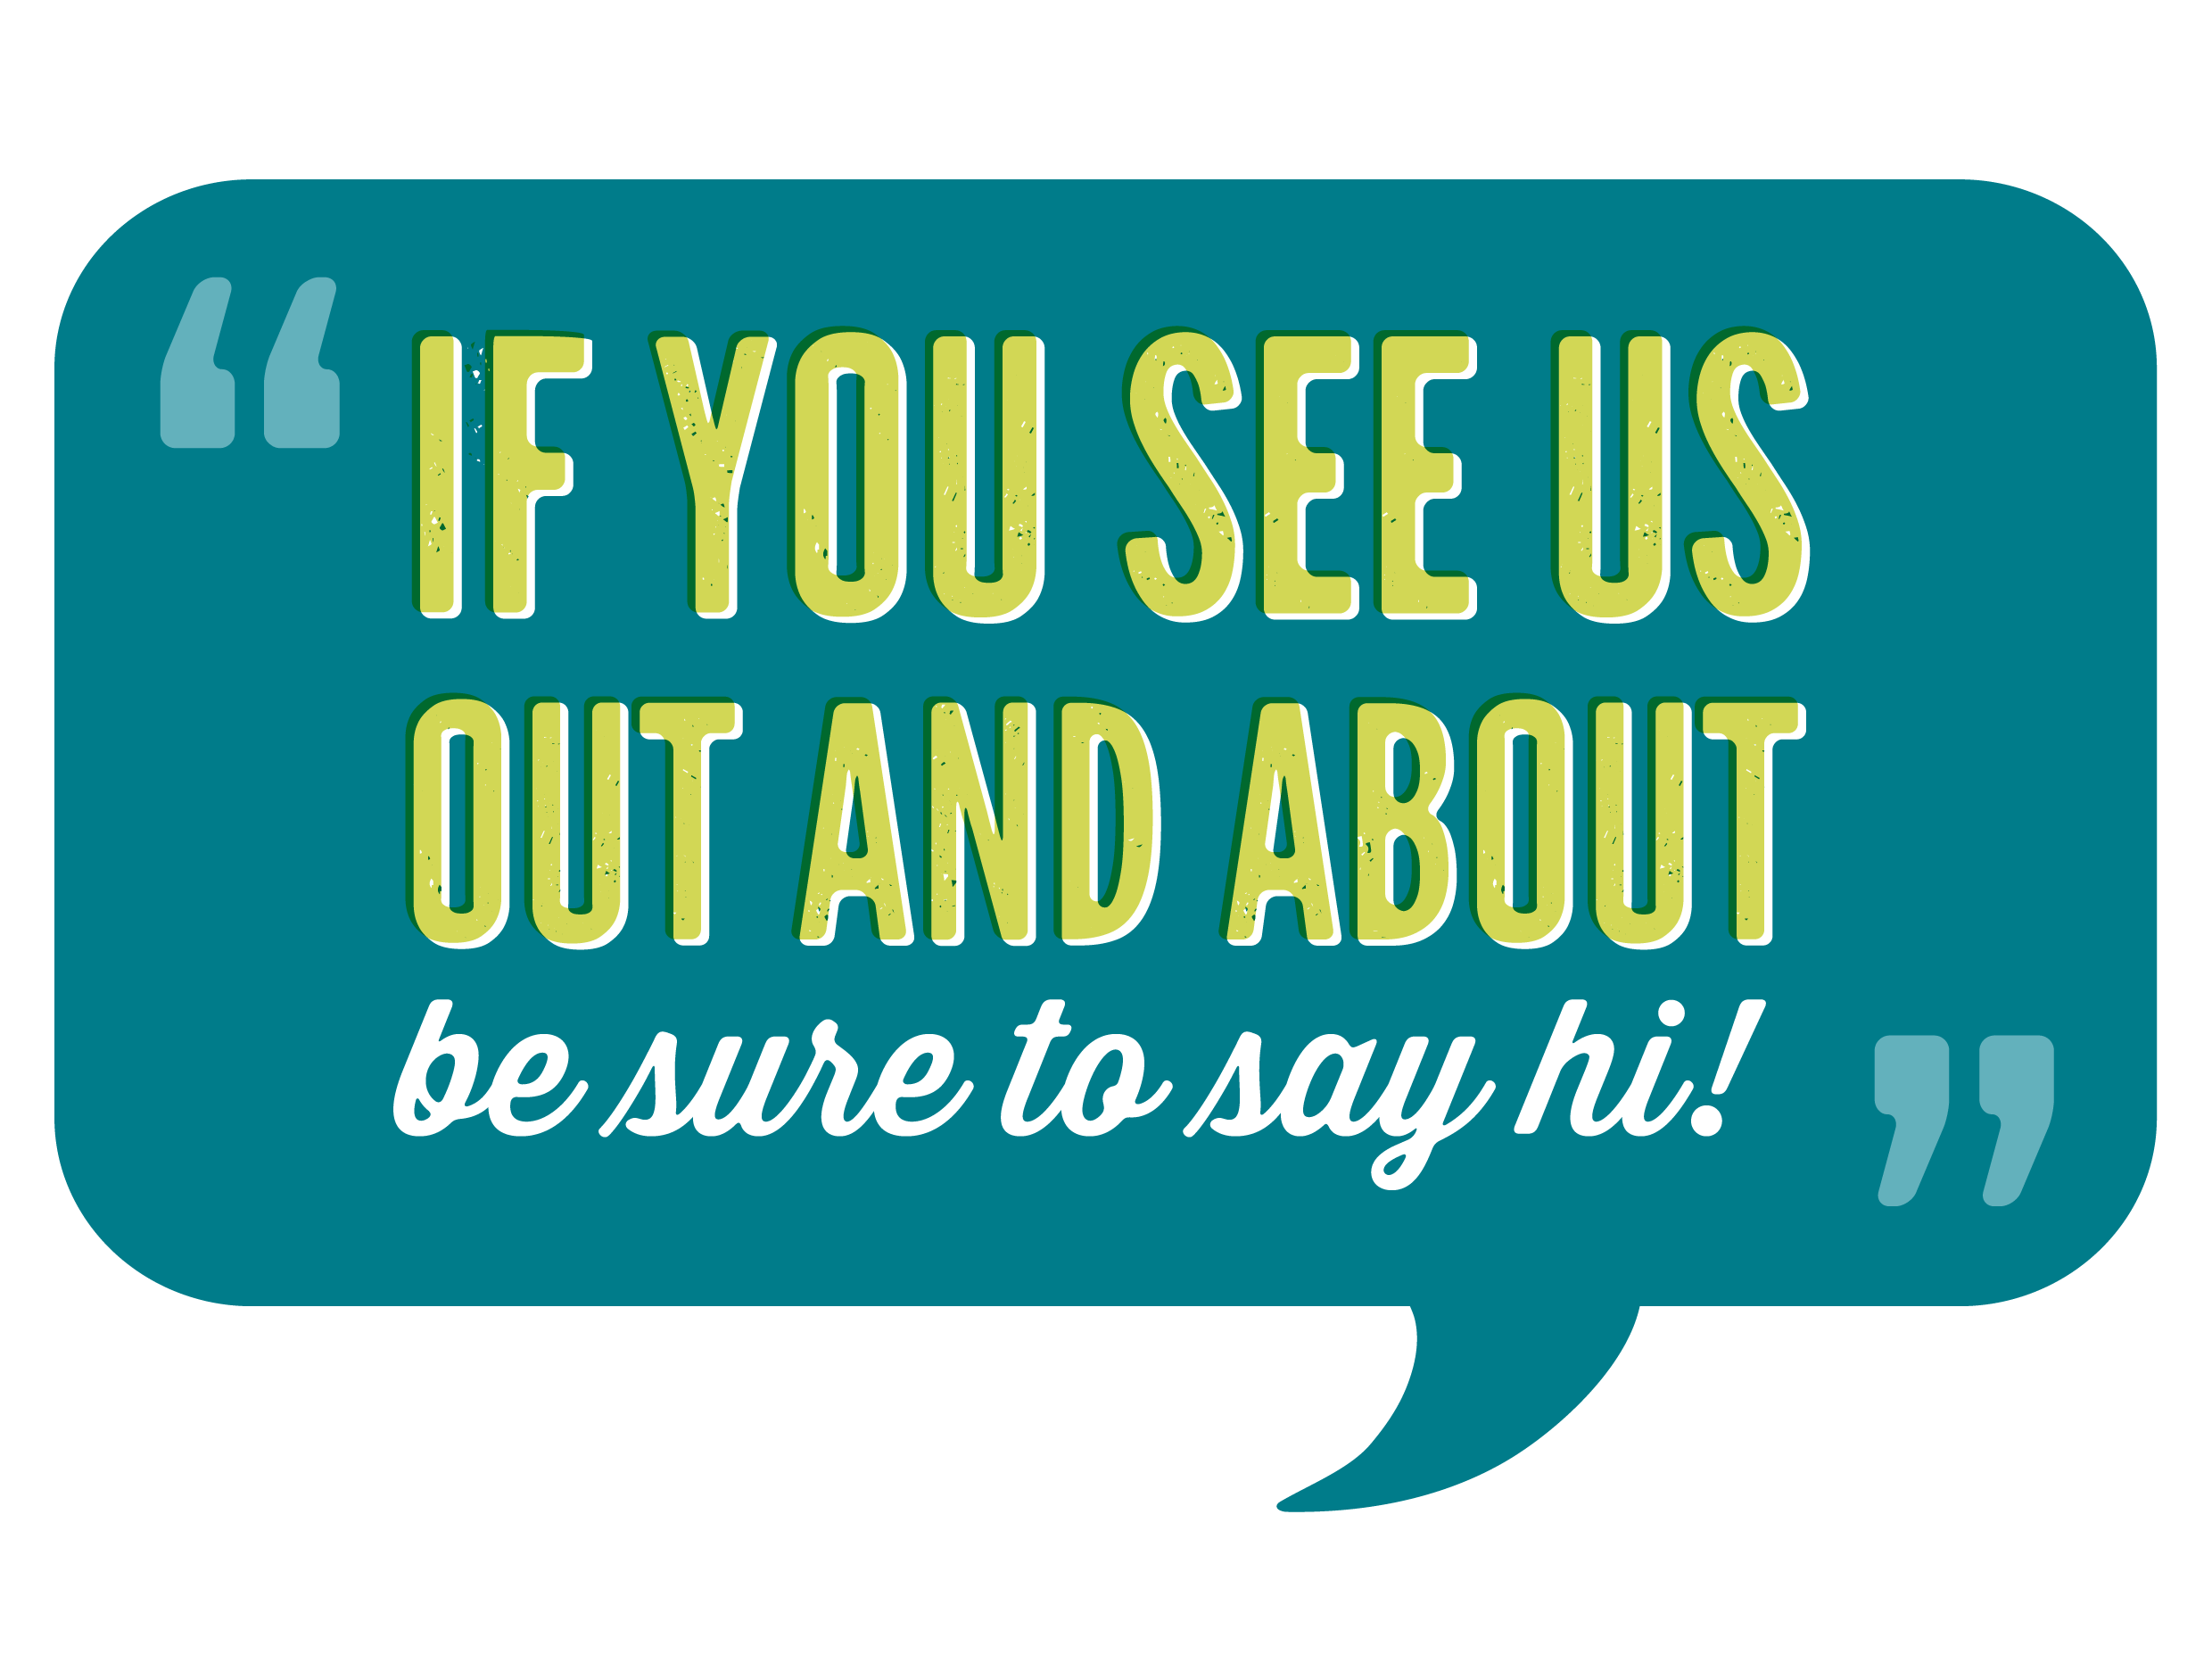 Speech bubble icon with the words "If you see us out and about, be sure to say hi".